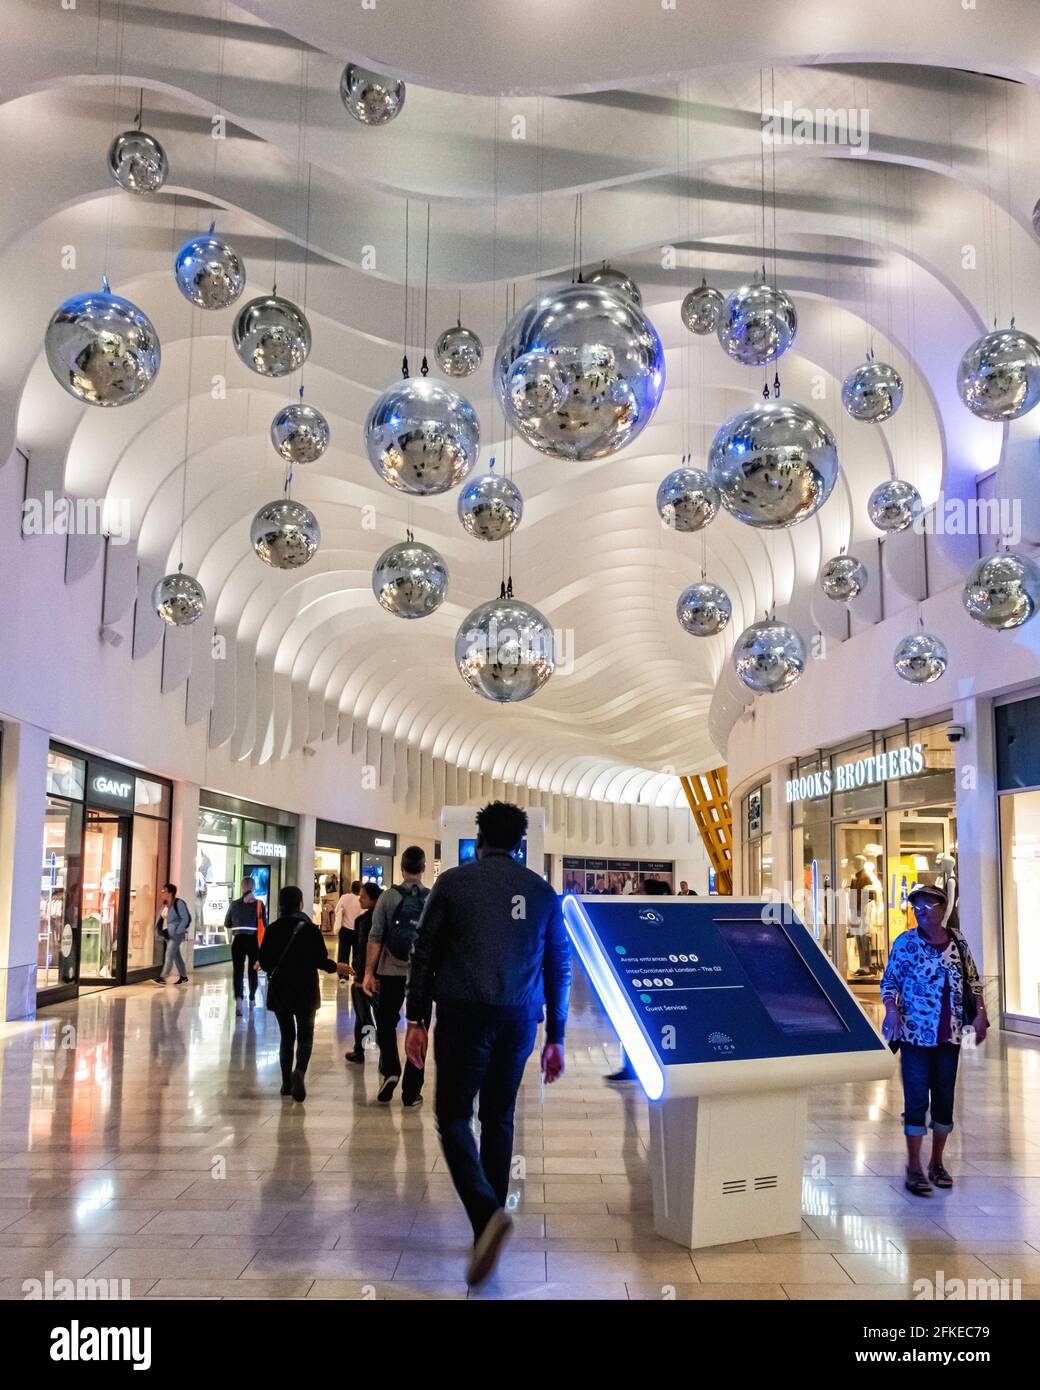 The Icon Outlet. Shopping centre at the O2 arena offers discounts on top designer brands,Greenwich Peninsula, London,UK Stock Photo